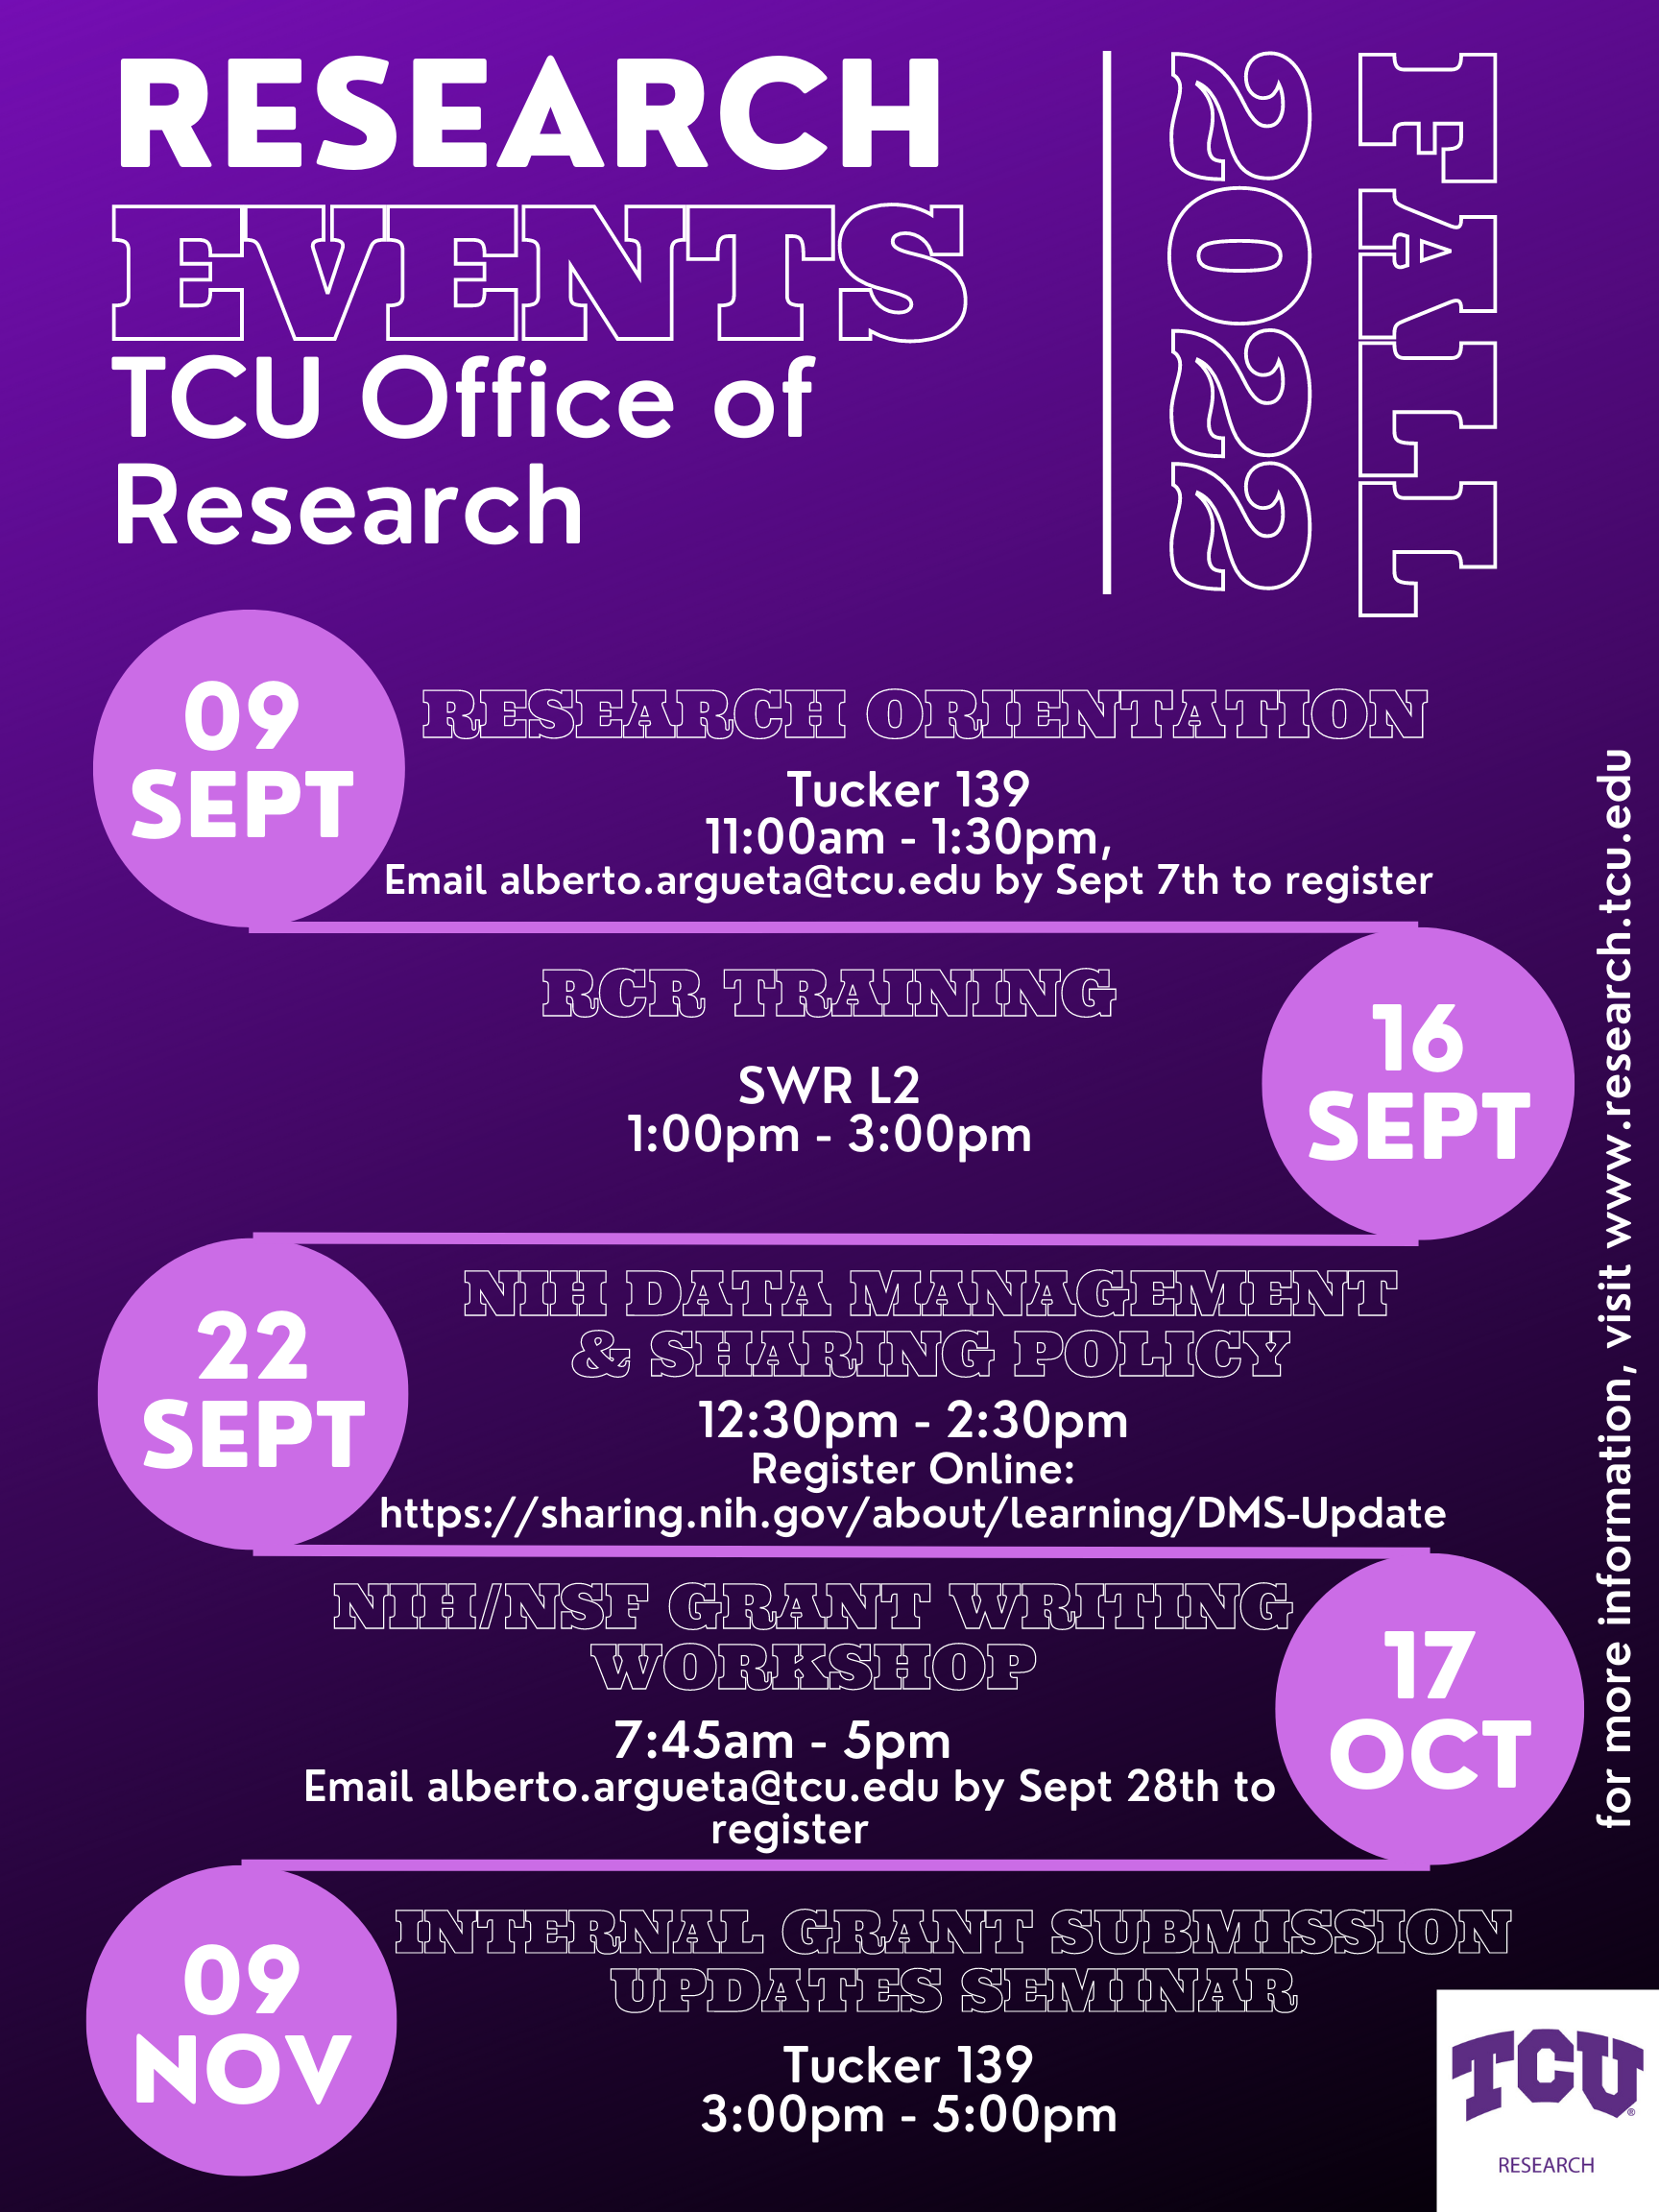 Research events listing